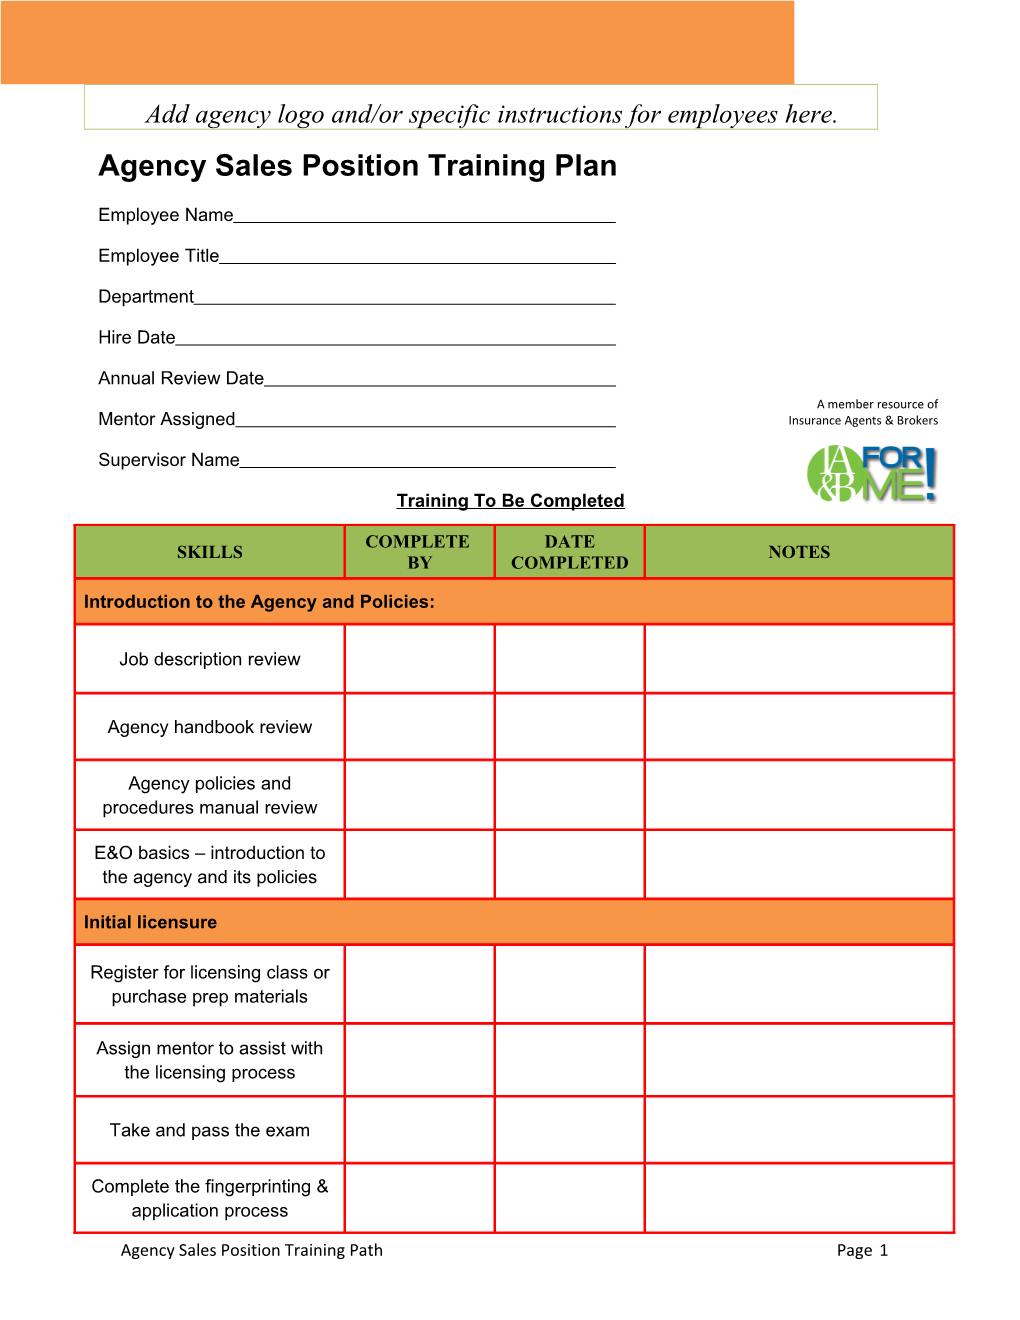 Agency Sales Positiontraining Plan